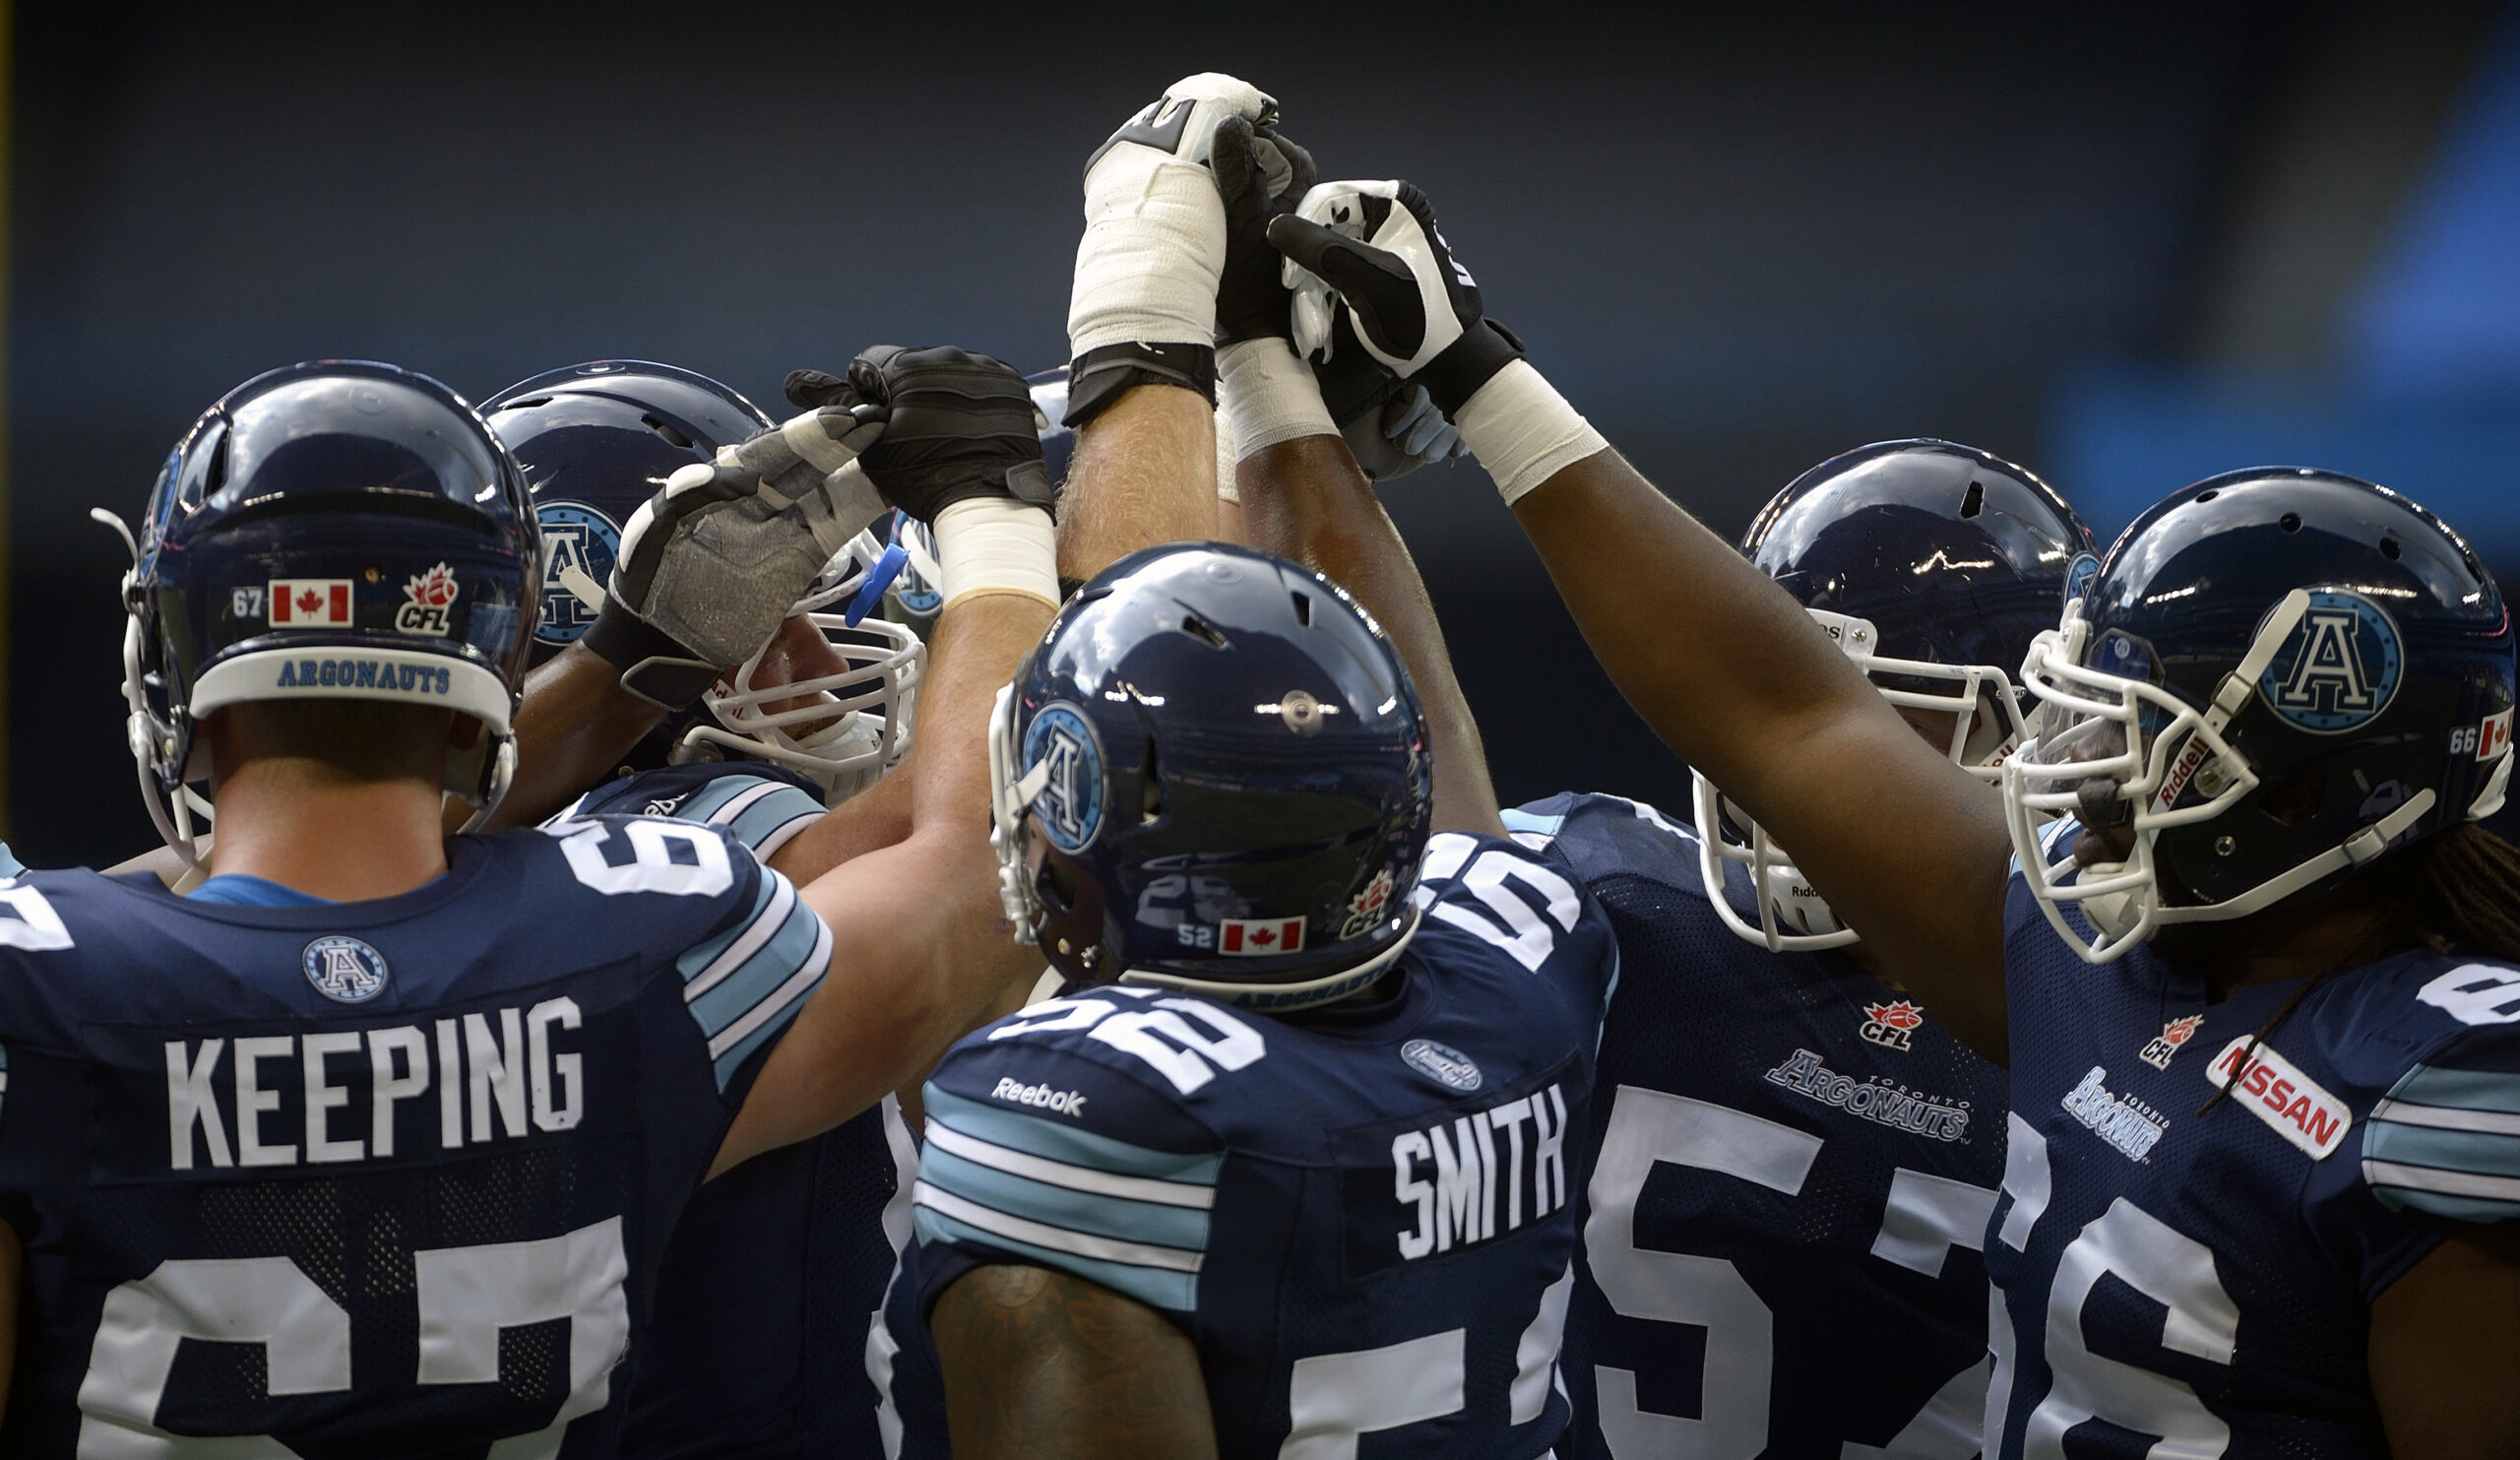 The Canadian Football League can provide a fast-paced, quirky